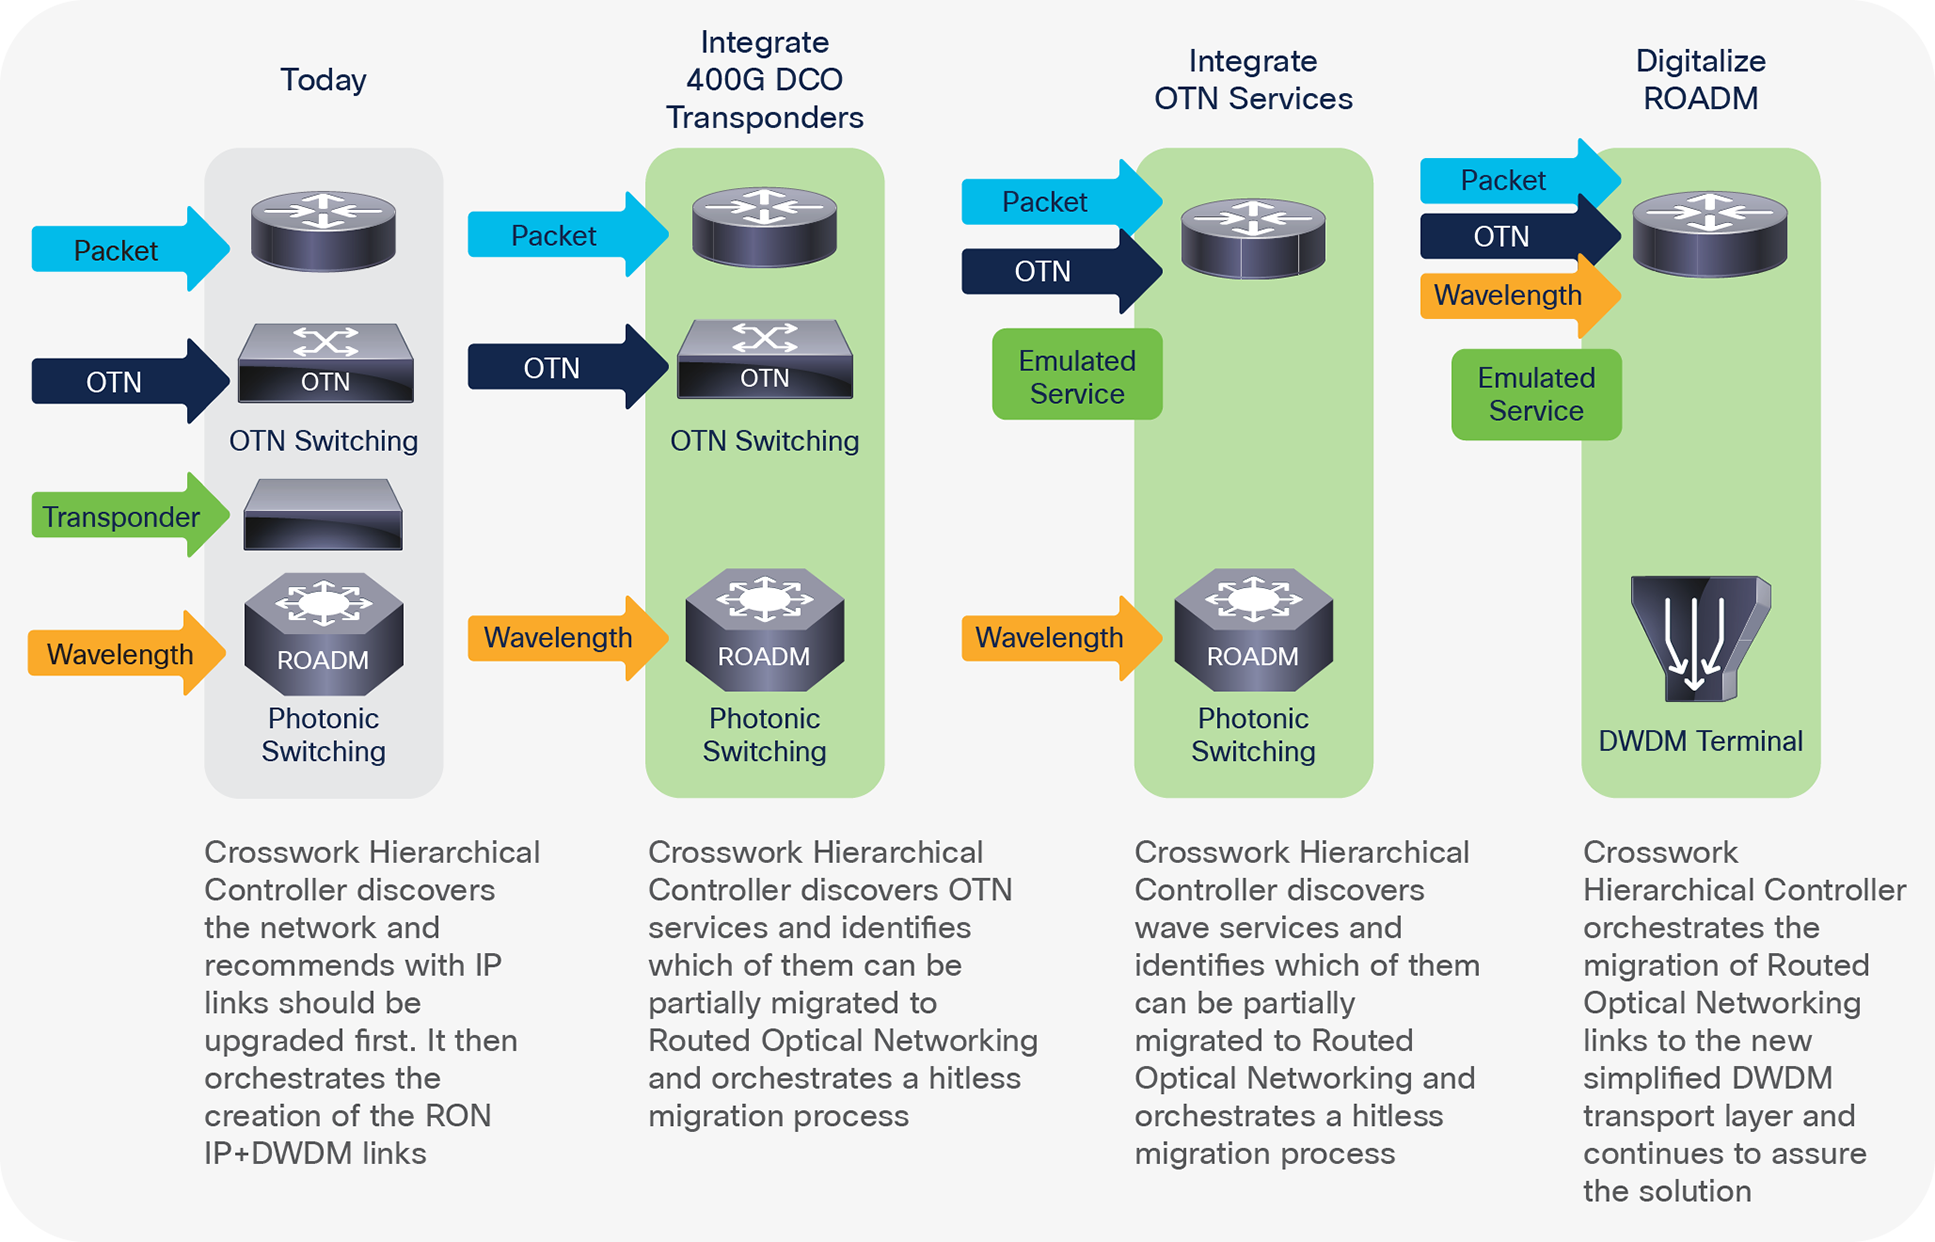 Cisco Crosswork Hierarchical Controller’s role in migrating to RON-based networks